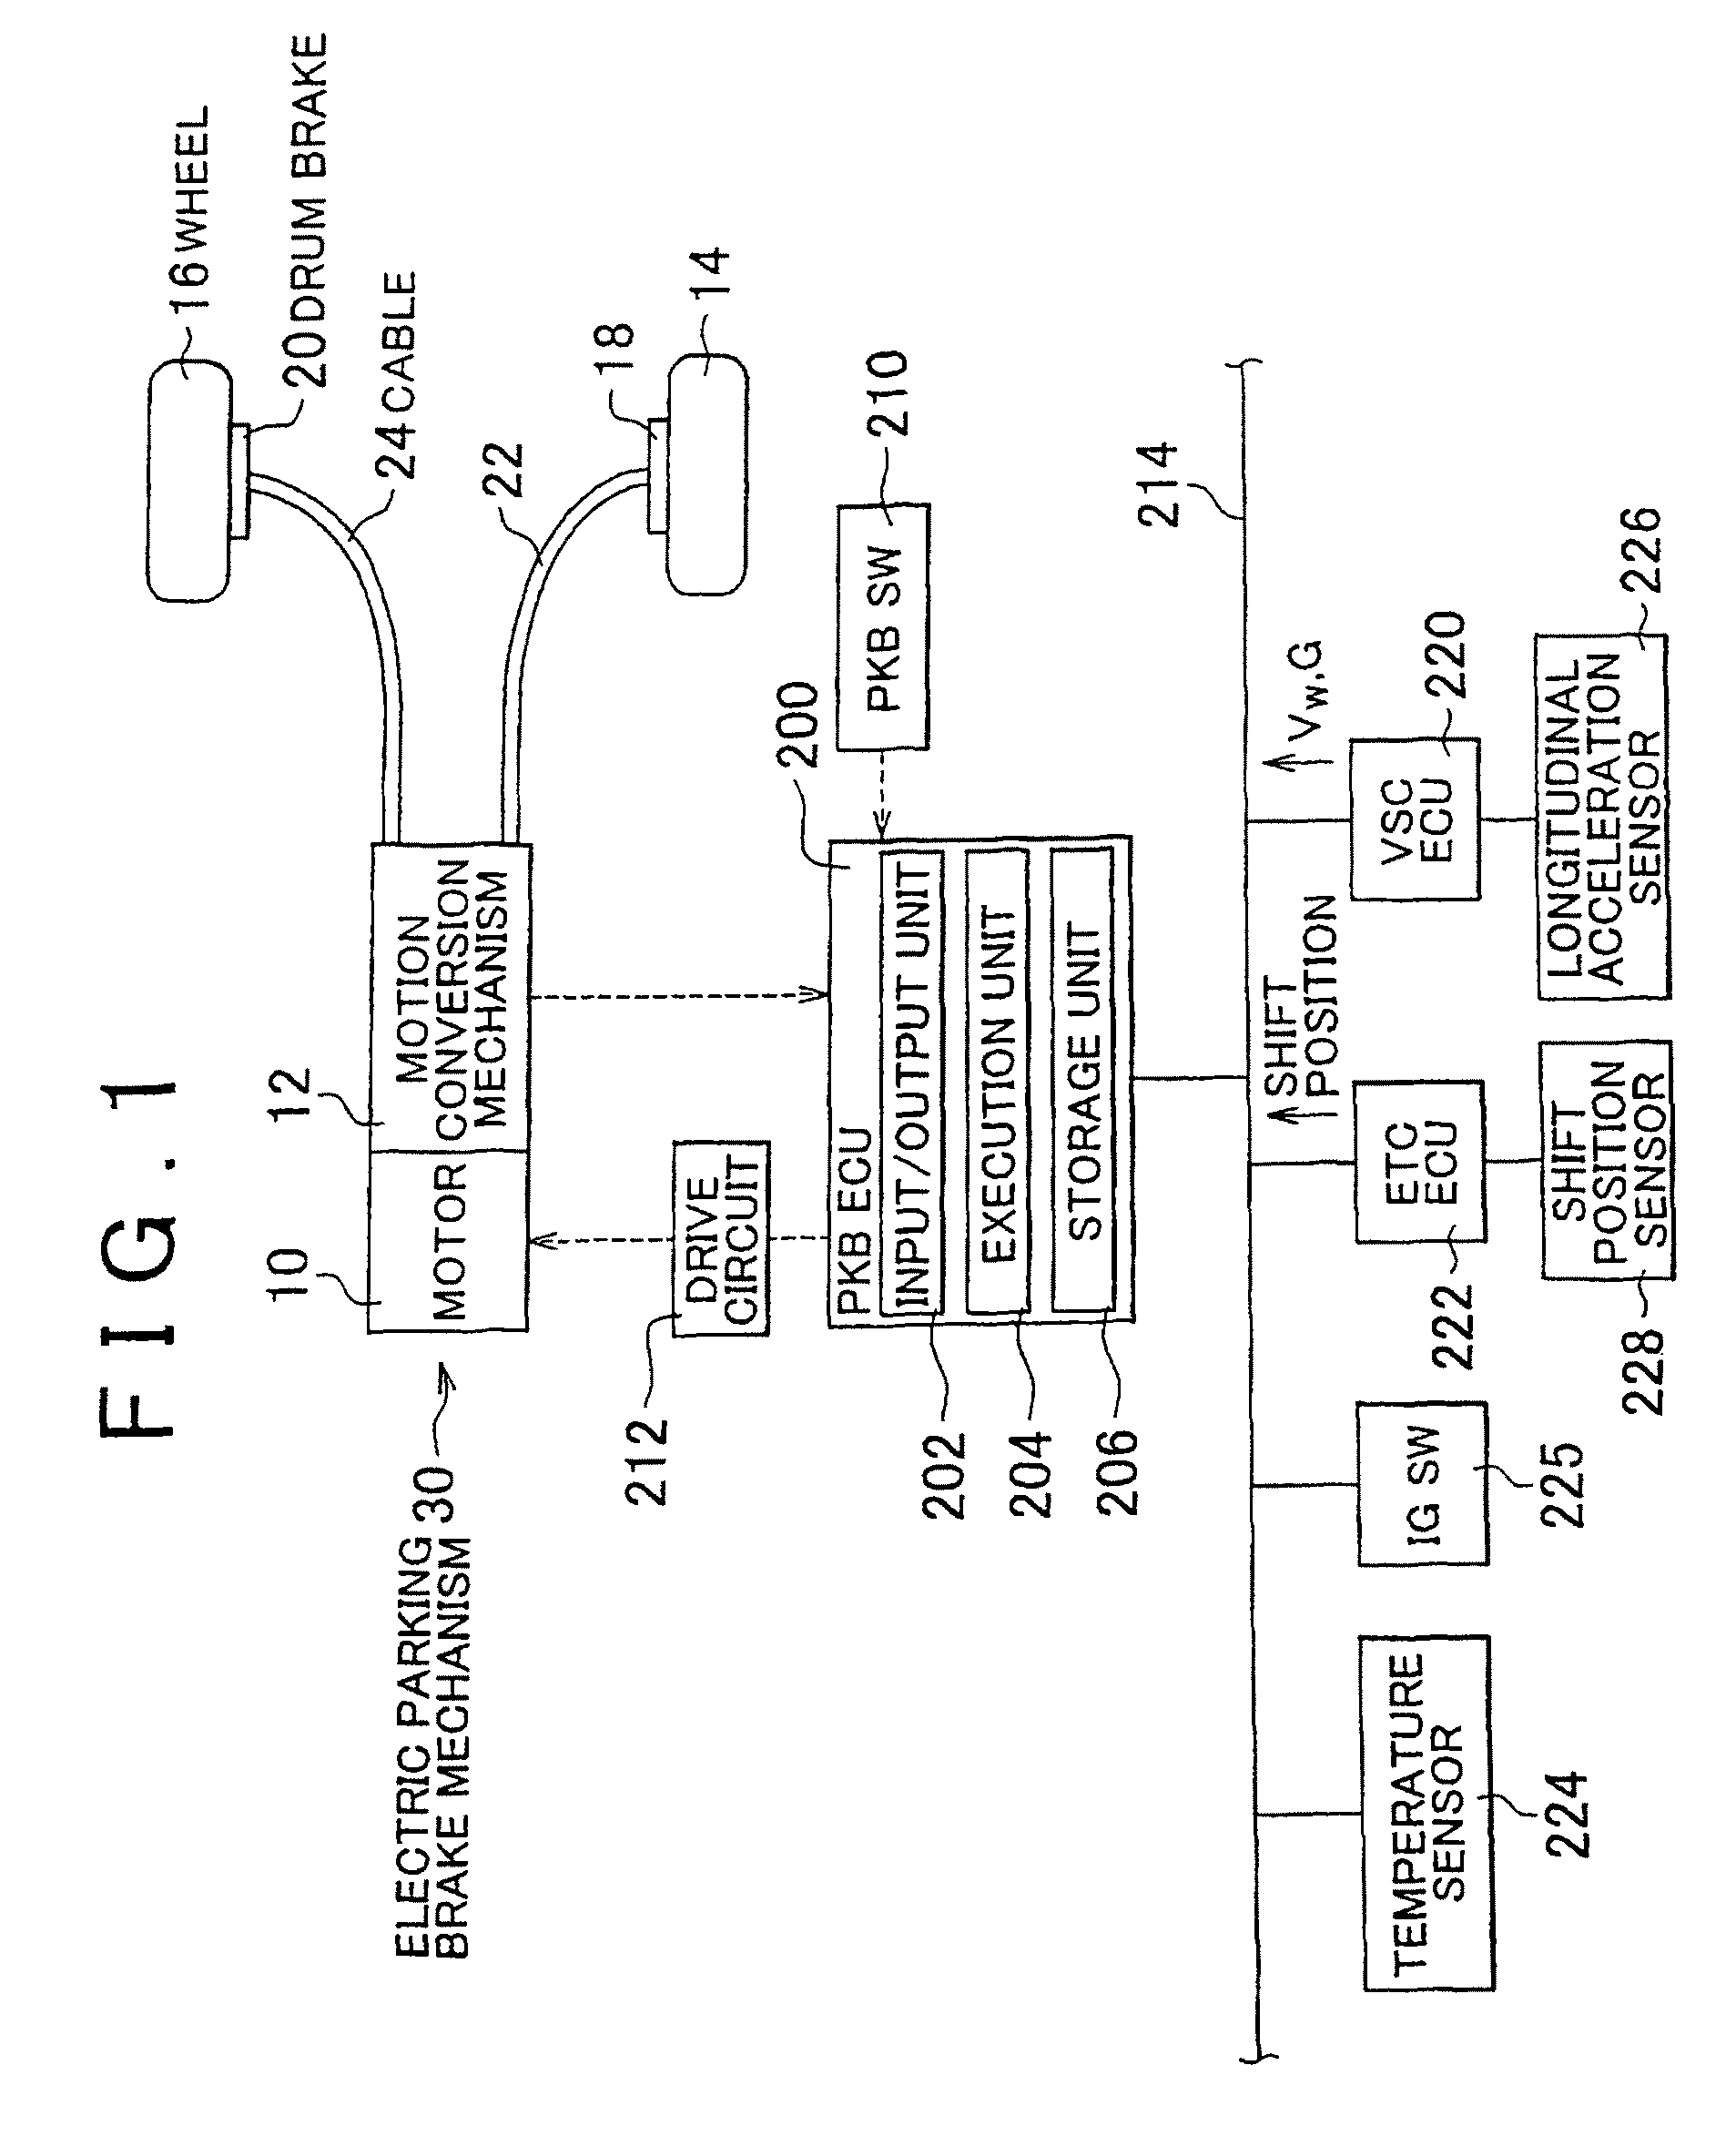 Electric parking brake system and method for controlling the electric parking brake system